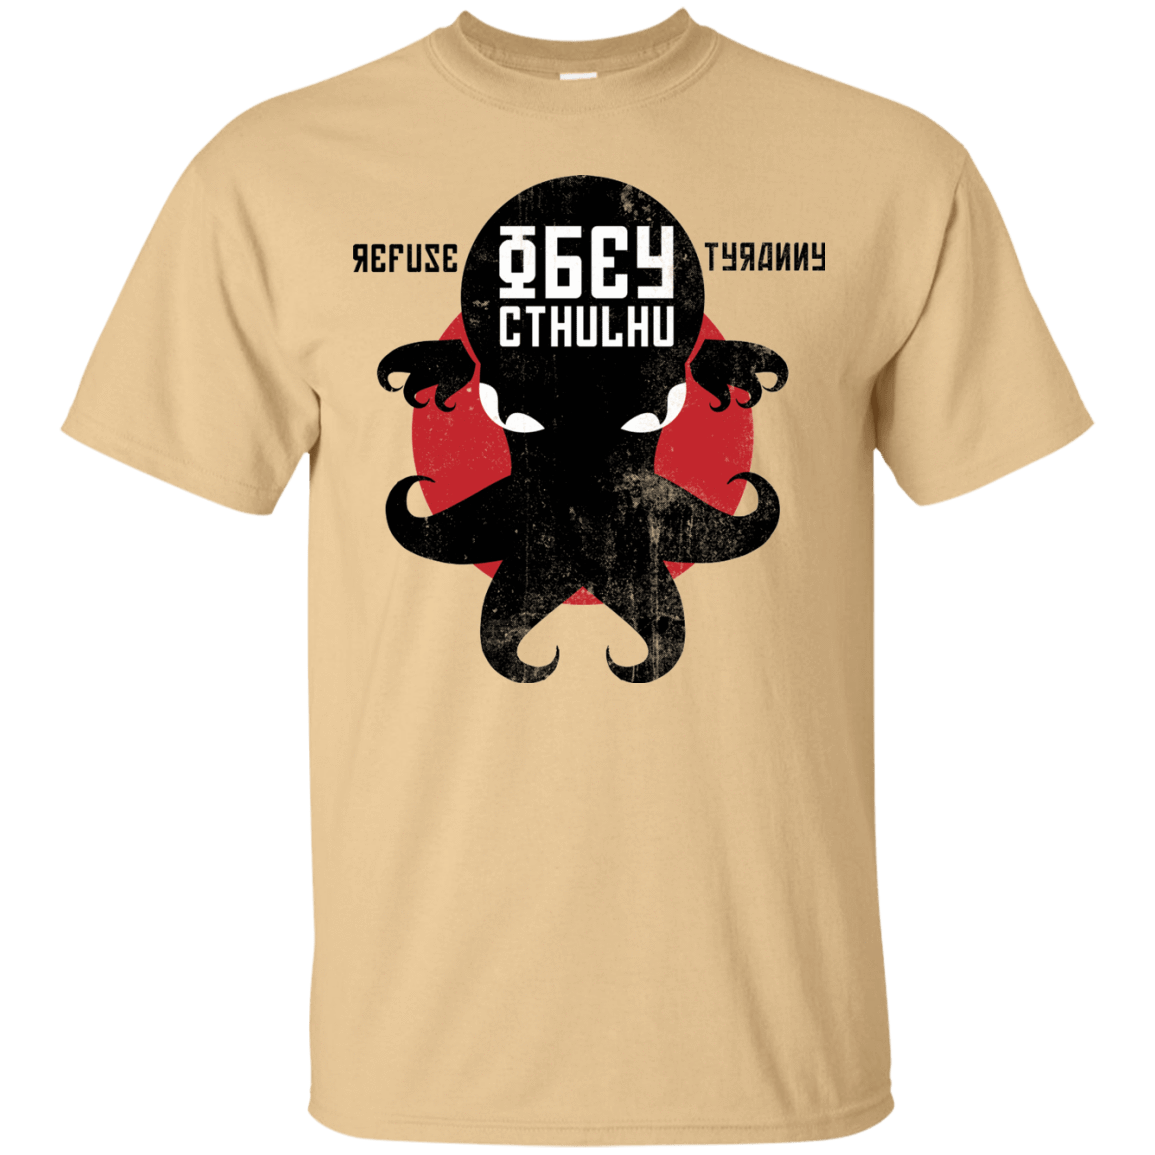 Refuse Tyranny Obey Cthulhu T Shirt Pop Up Tee